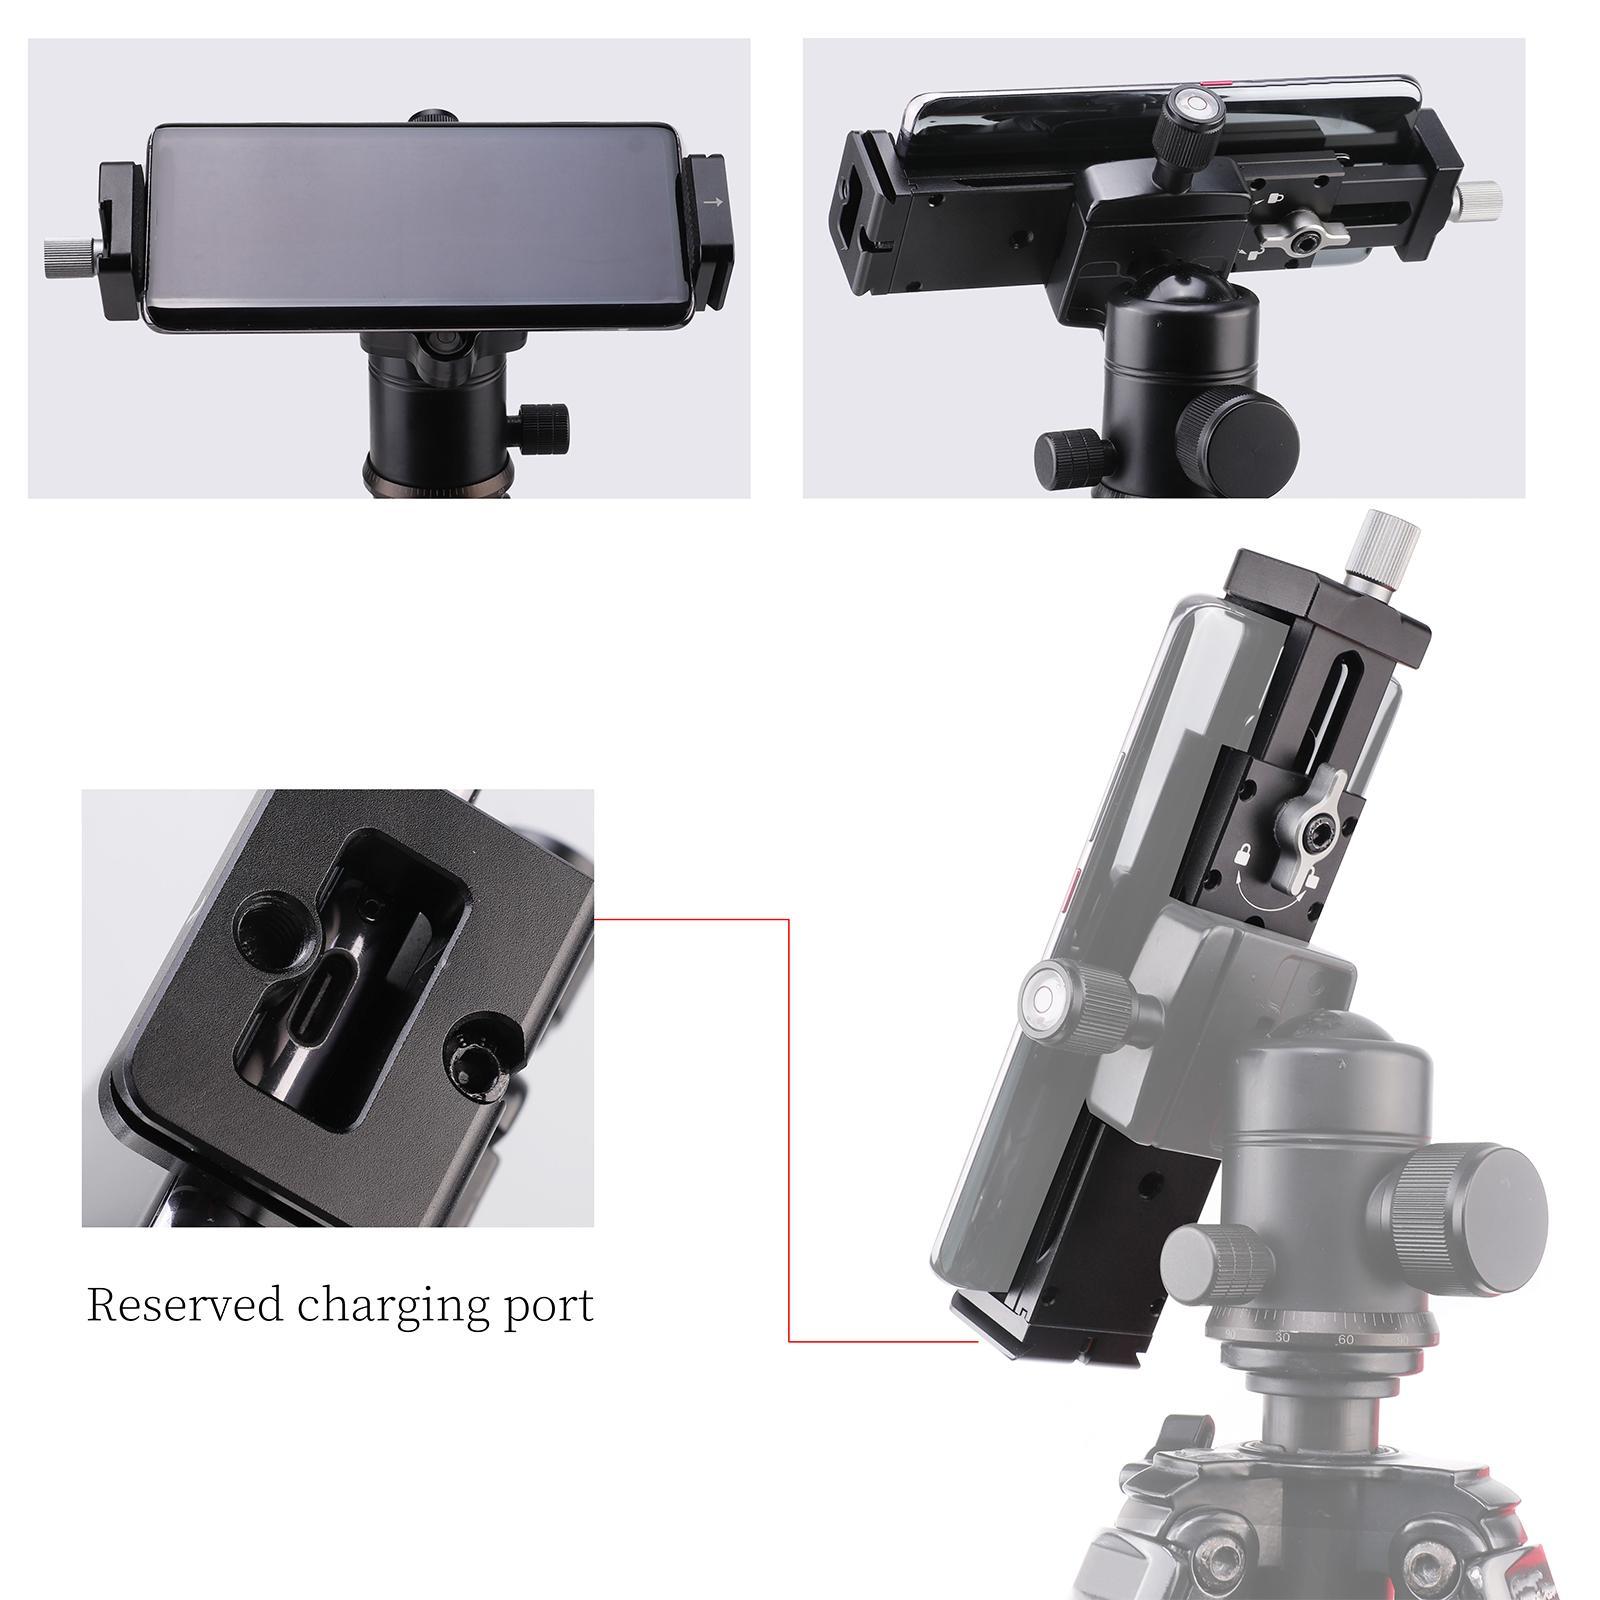 Universal Tablet Clamp Aluminum Alloy with Cold Shoe Tripod Adapter Bracket Metal Holder Mount for Tripod Mount Tablet Computer Smartphone